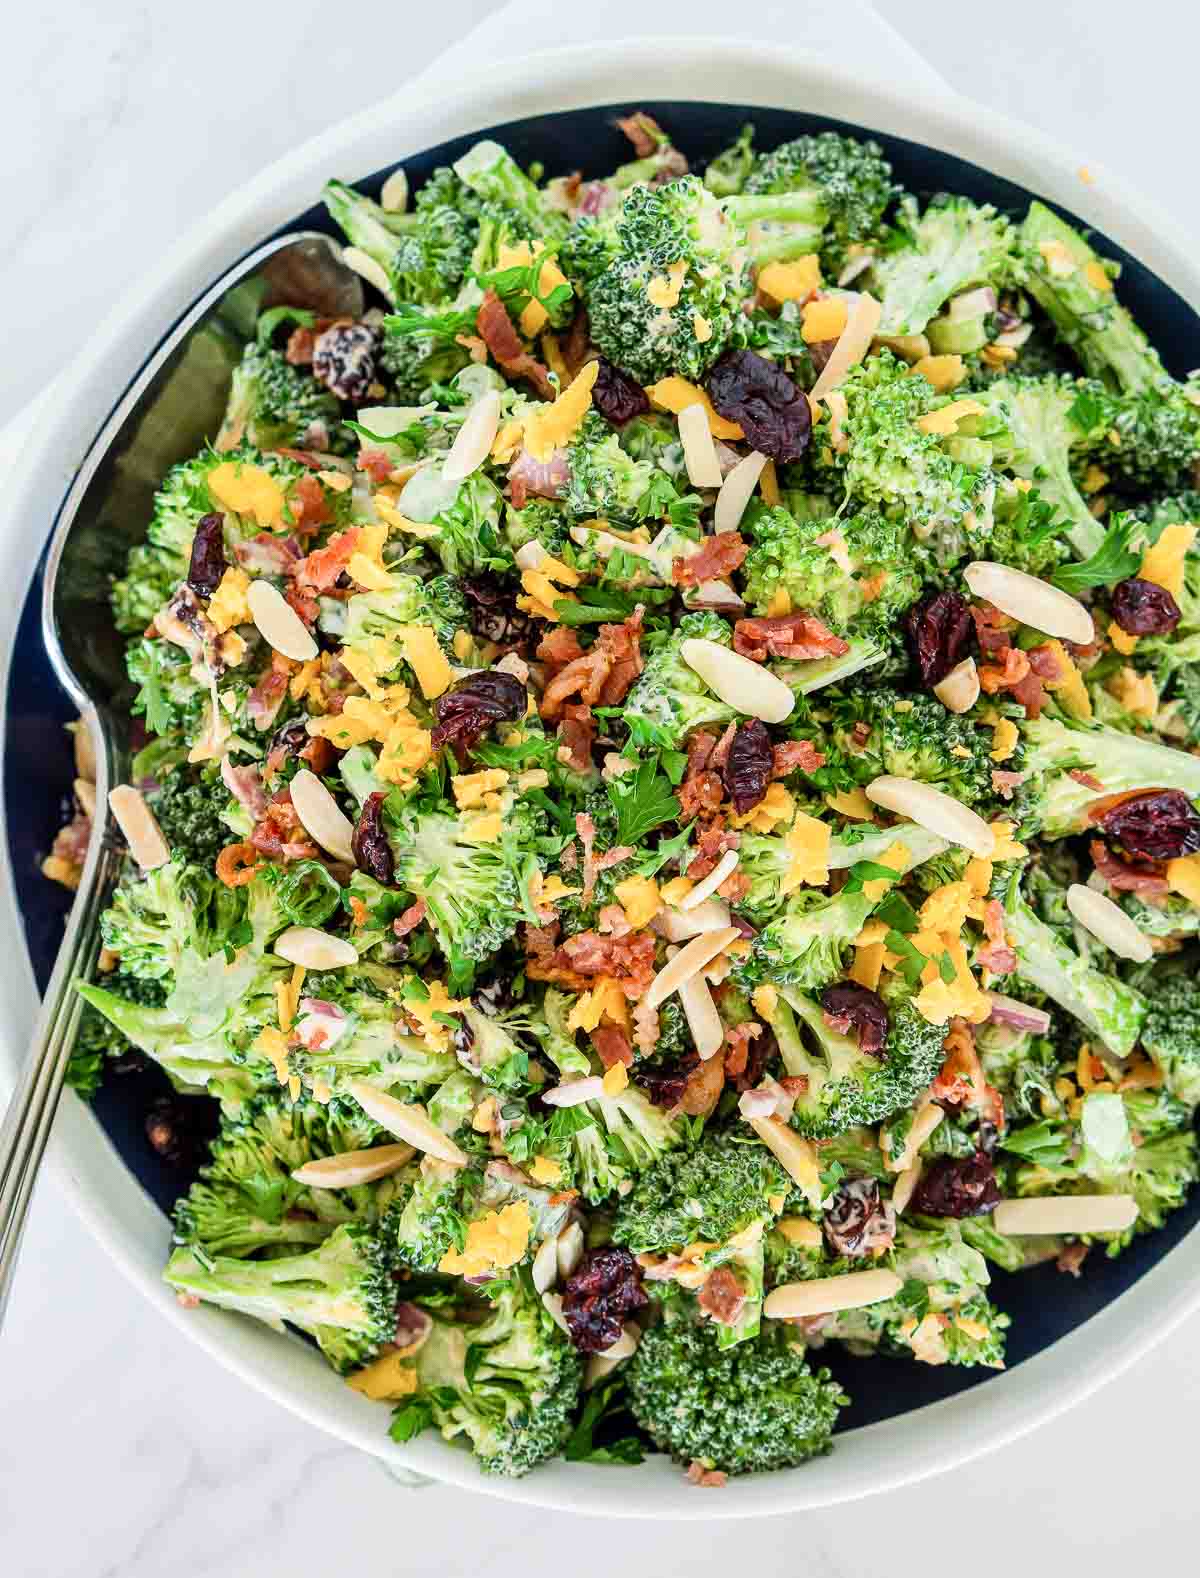 Bowl of broccoli salad with bacon, cheese, cranberries, and almonds.